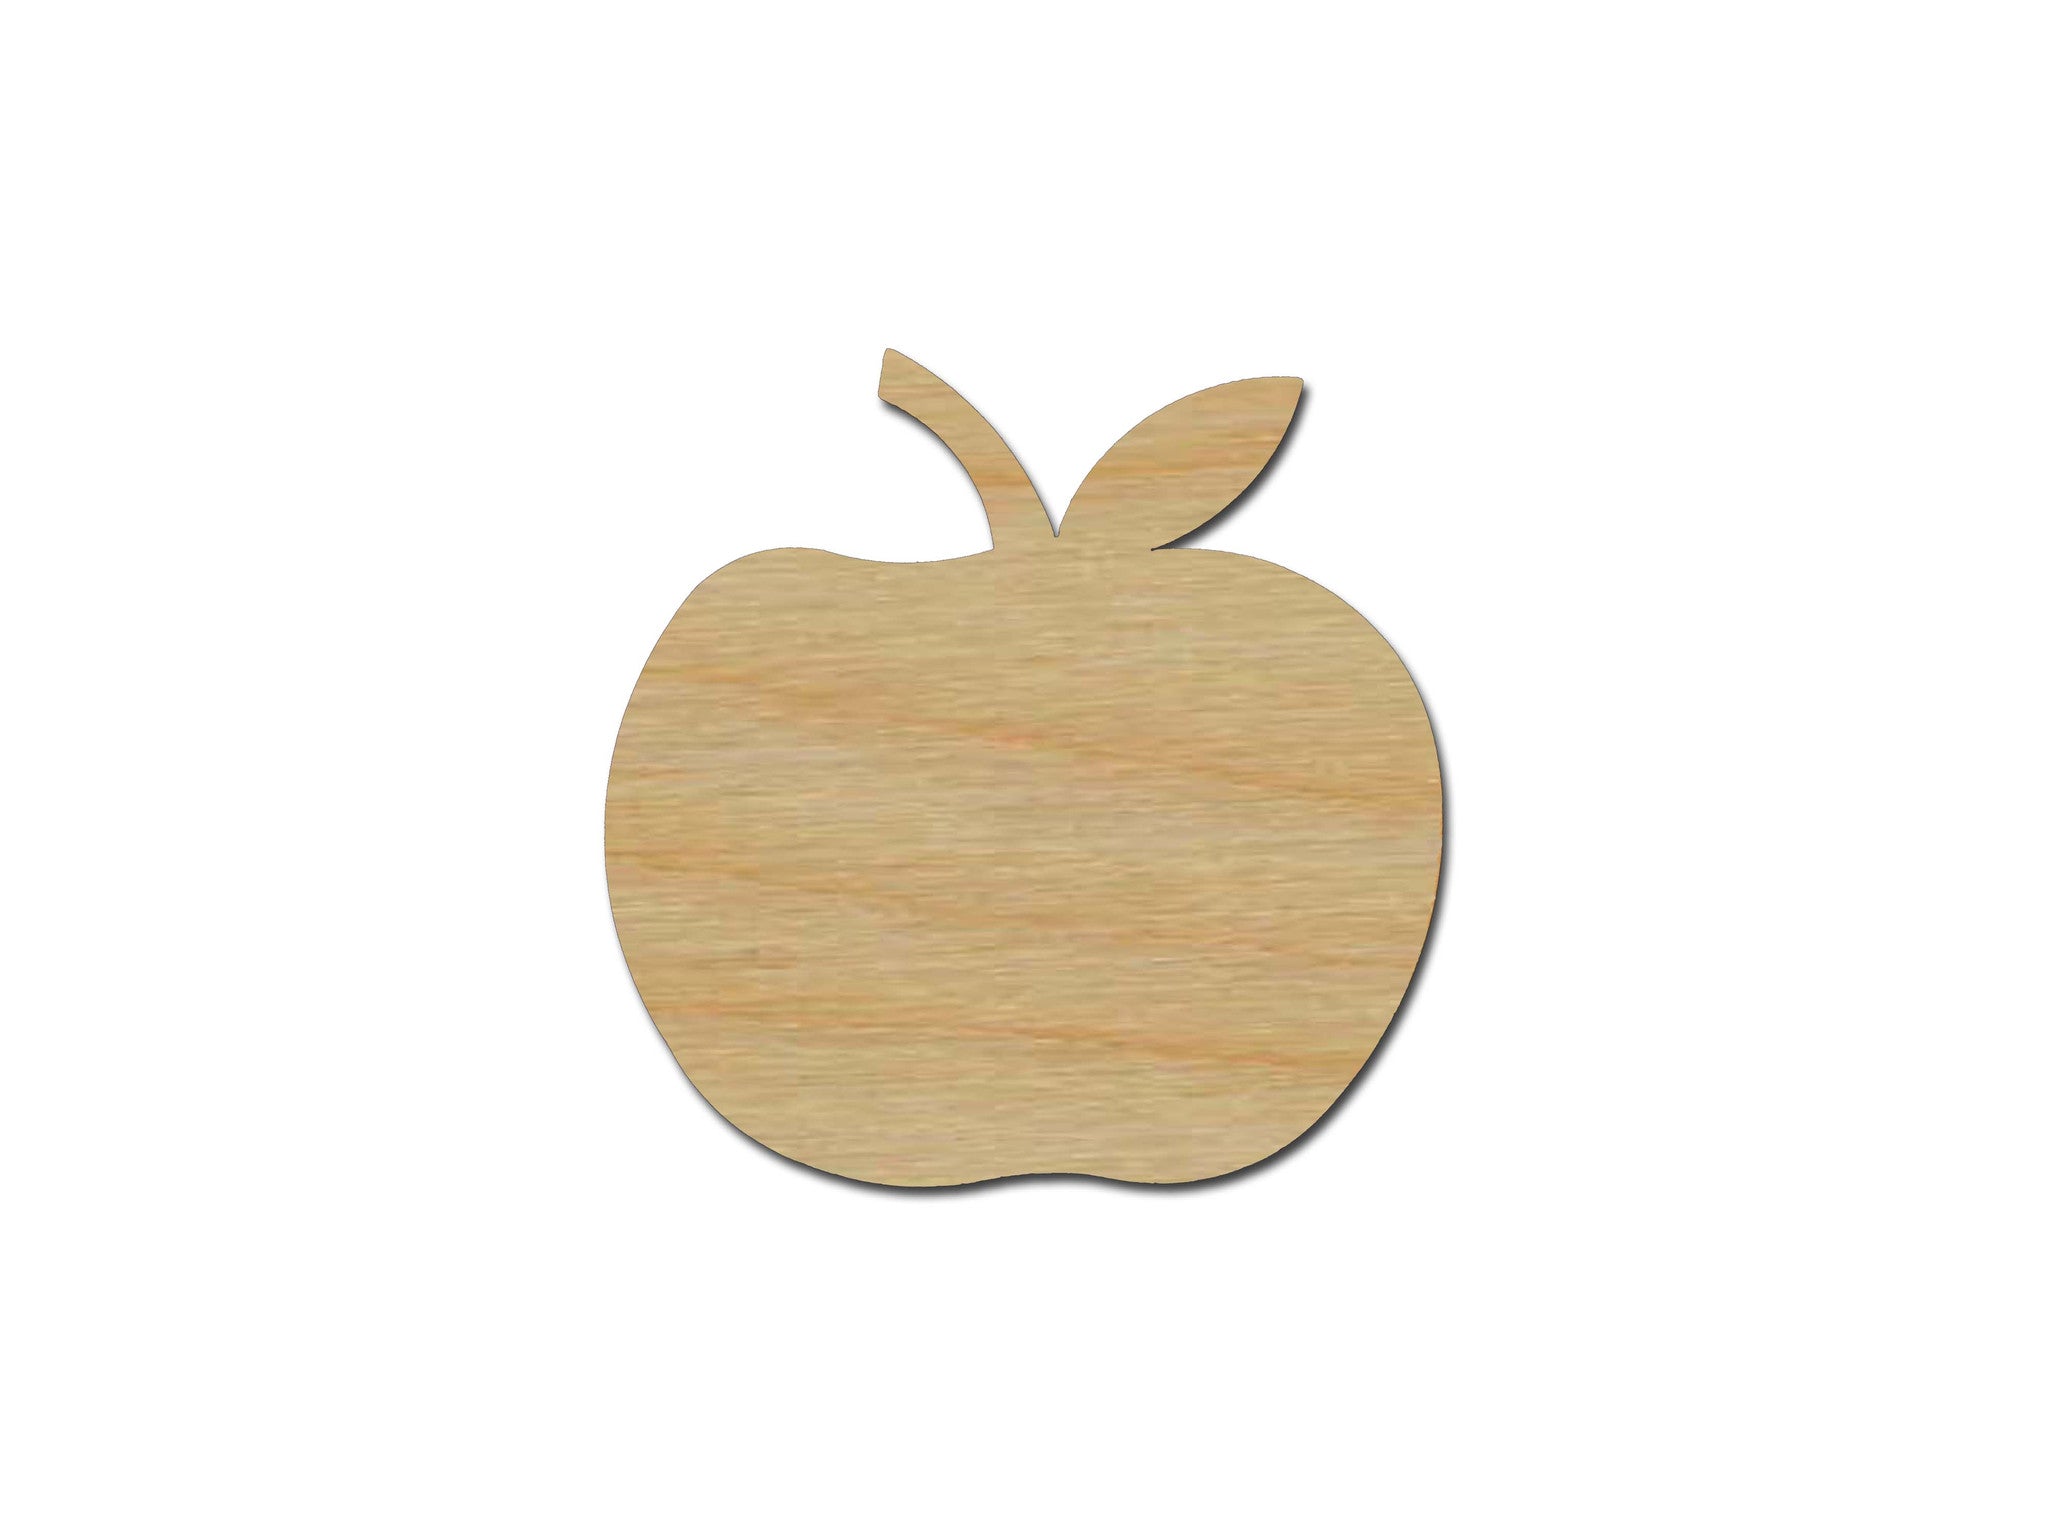 Buy Bread Board Wooden Cutout, Unfinished Circle Shape, Wood Craft